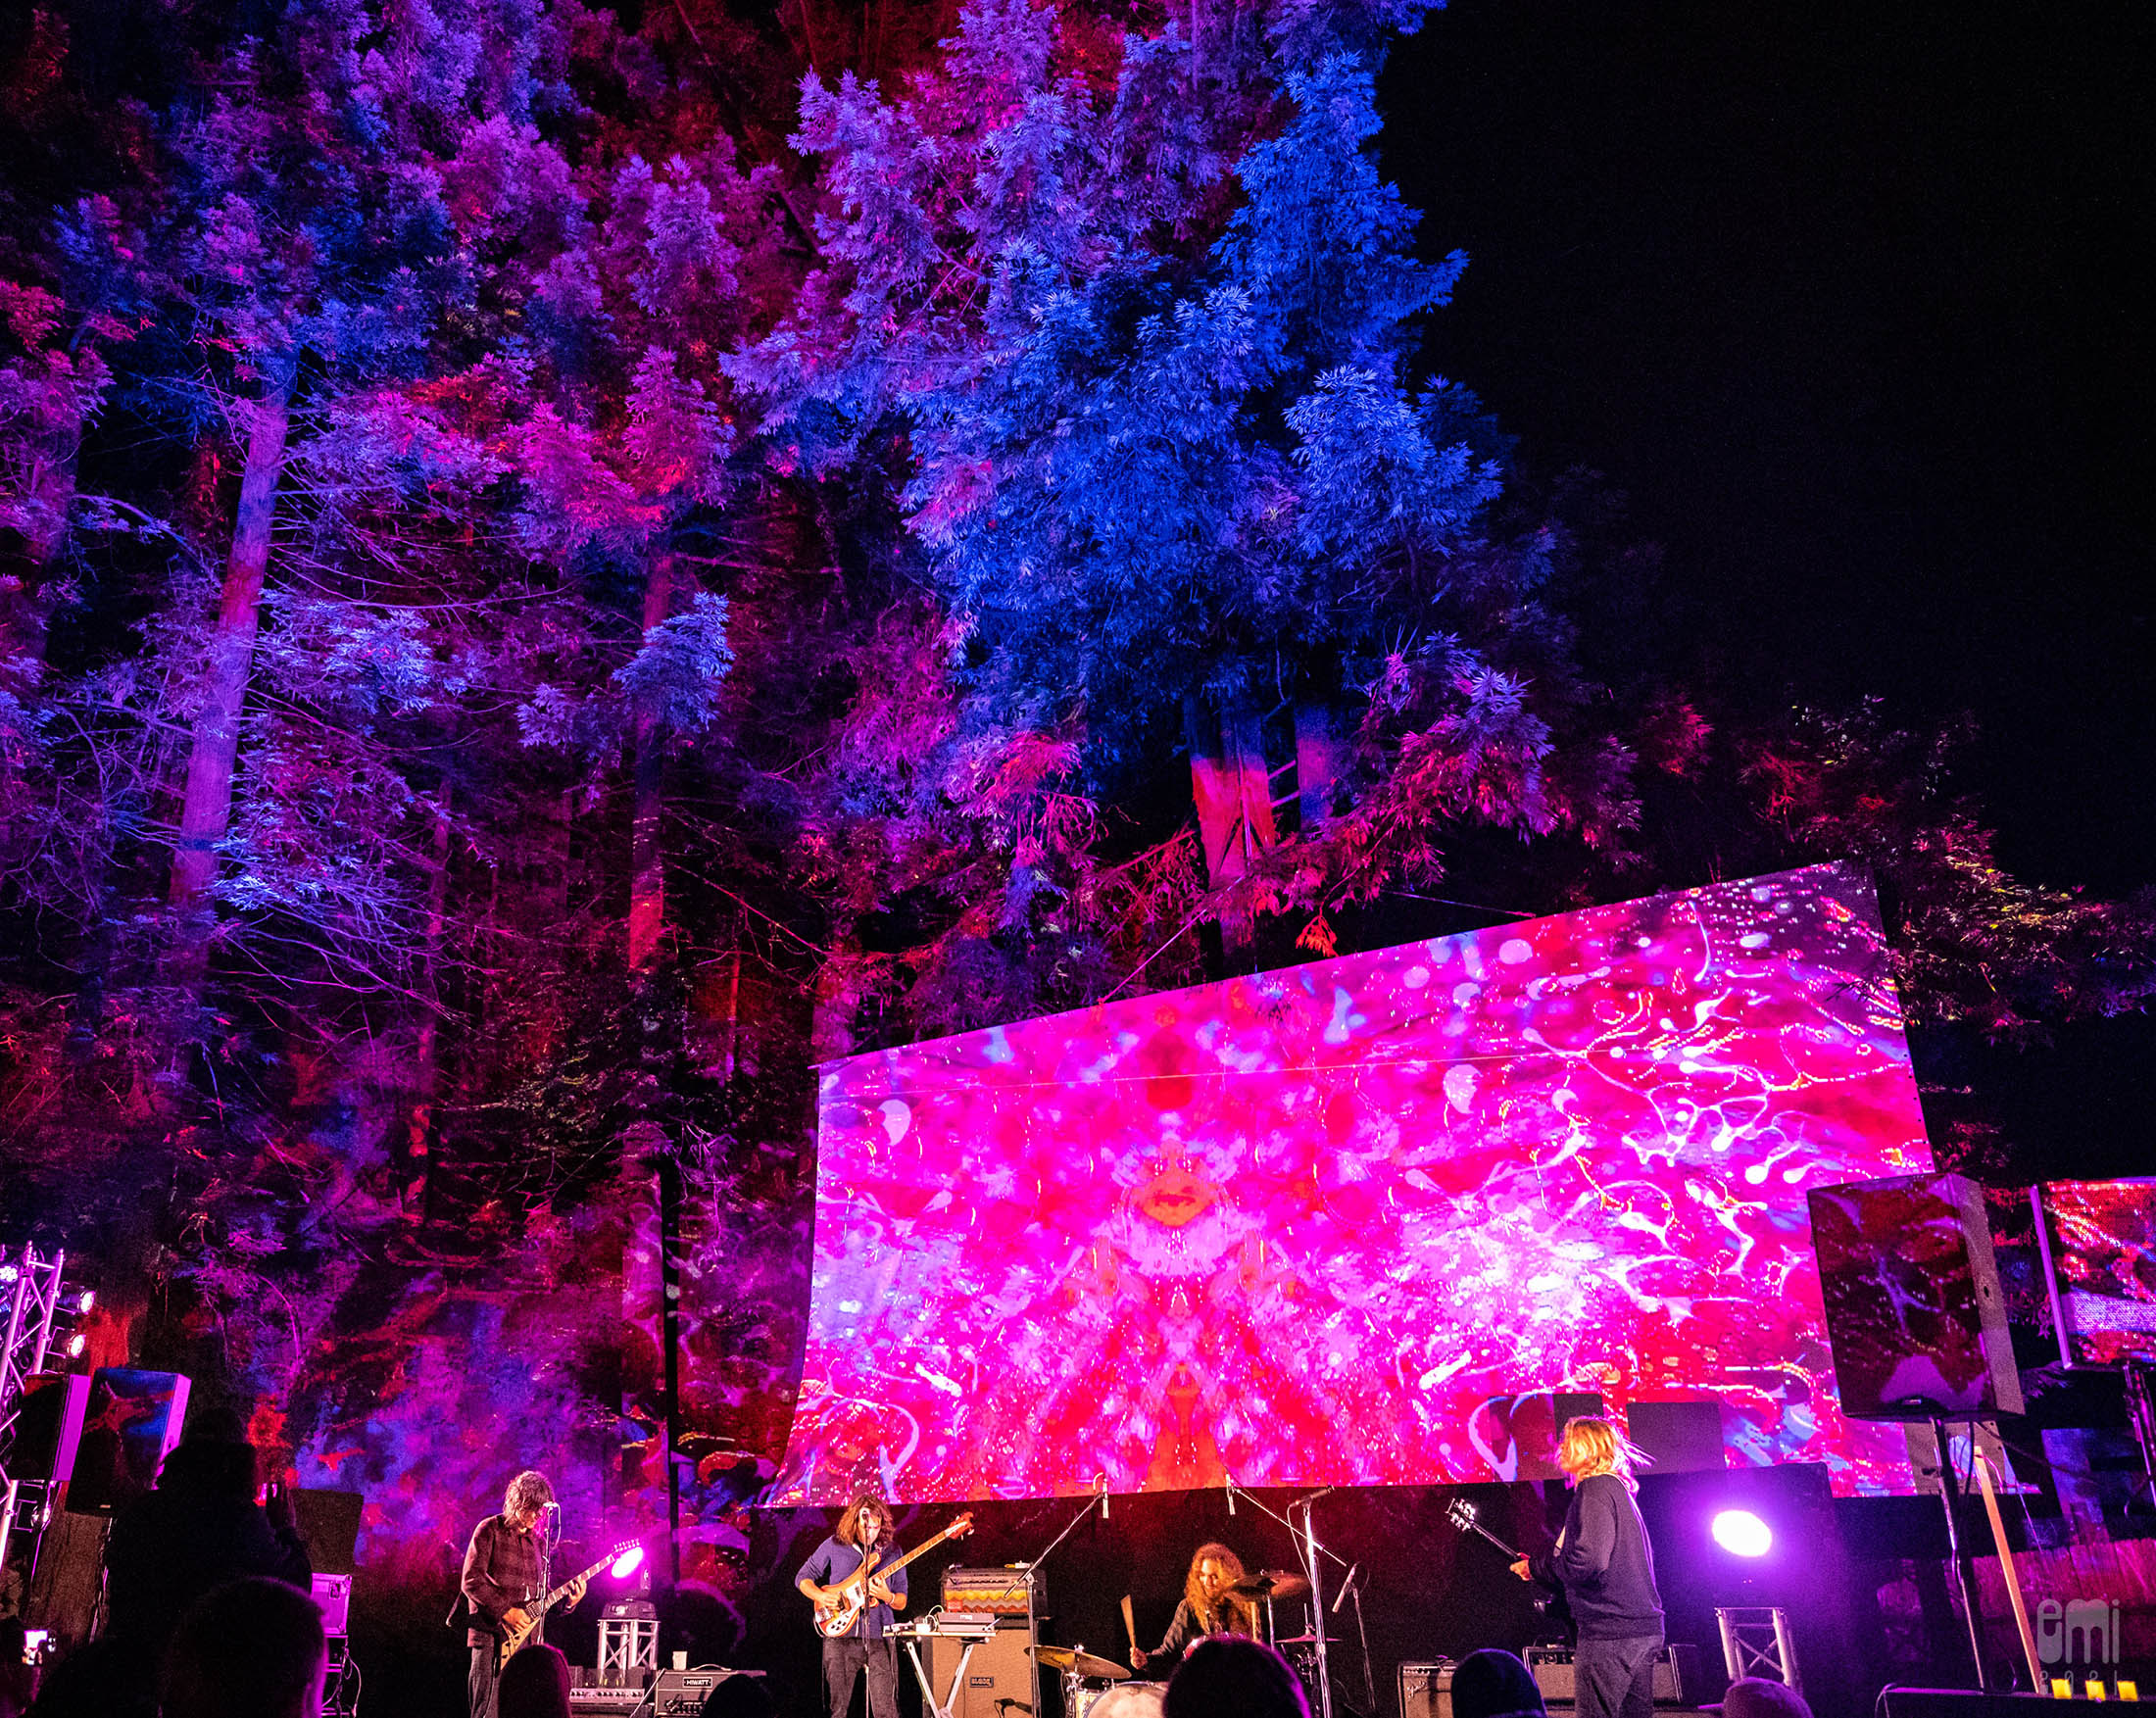 2021.9.15 Ty Segall and the Freedom Band with Mad Alchemy Liquid Light Show at Henry Miller Memorial Library, Big Sur, CA. photo by emi